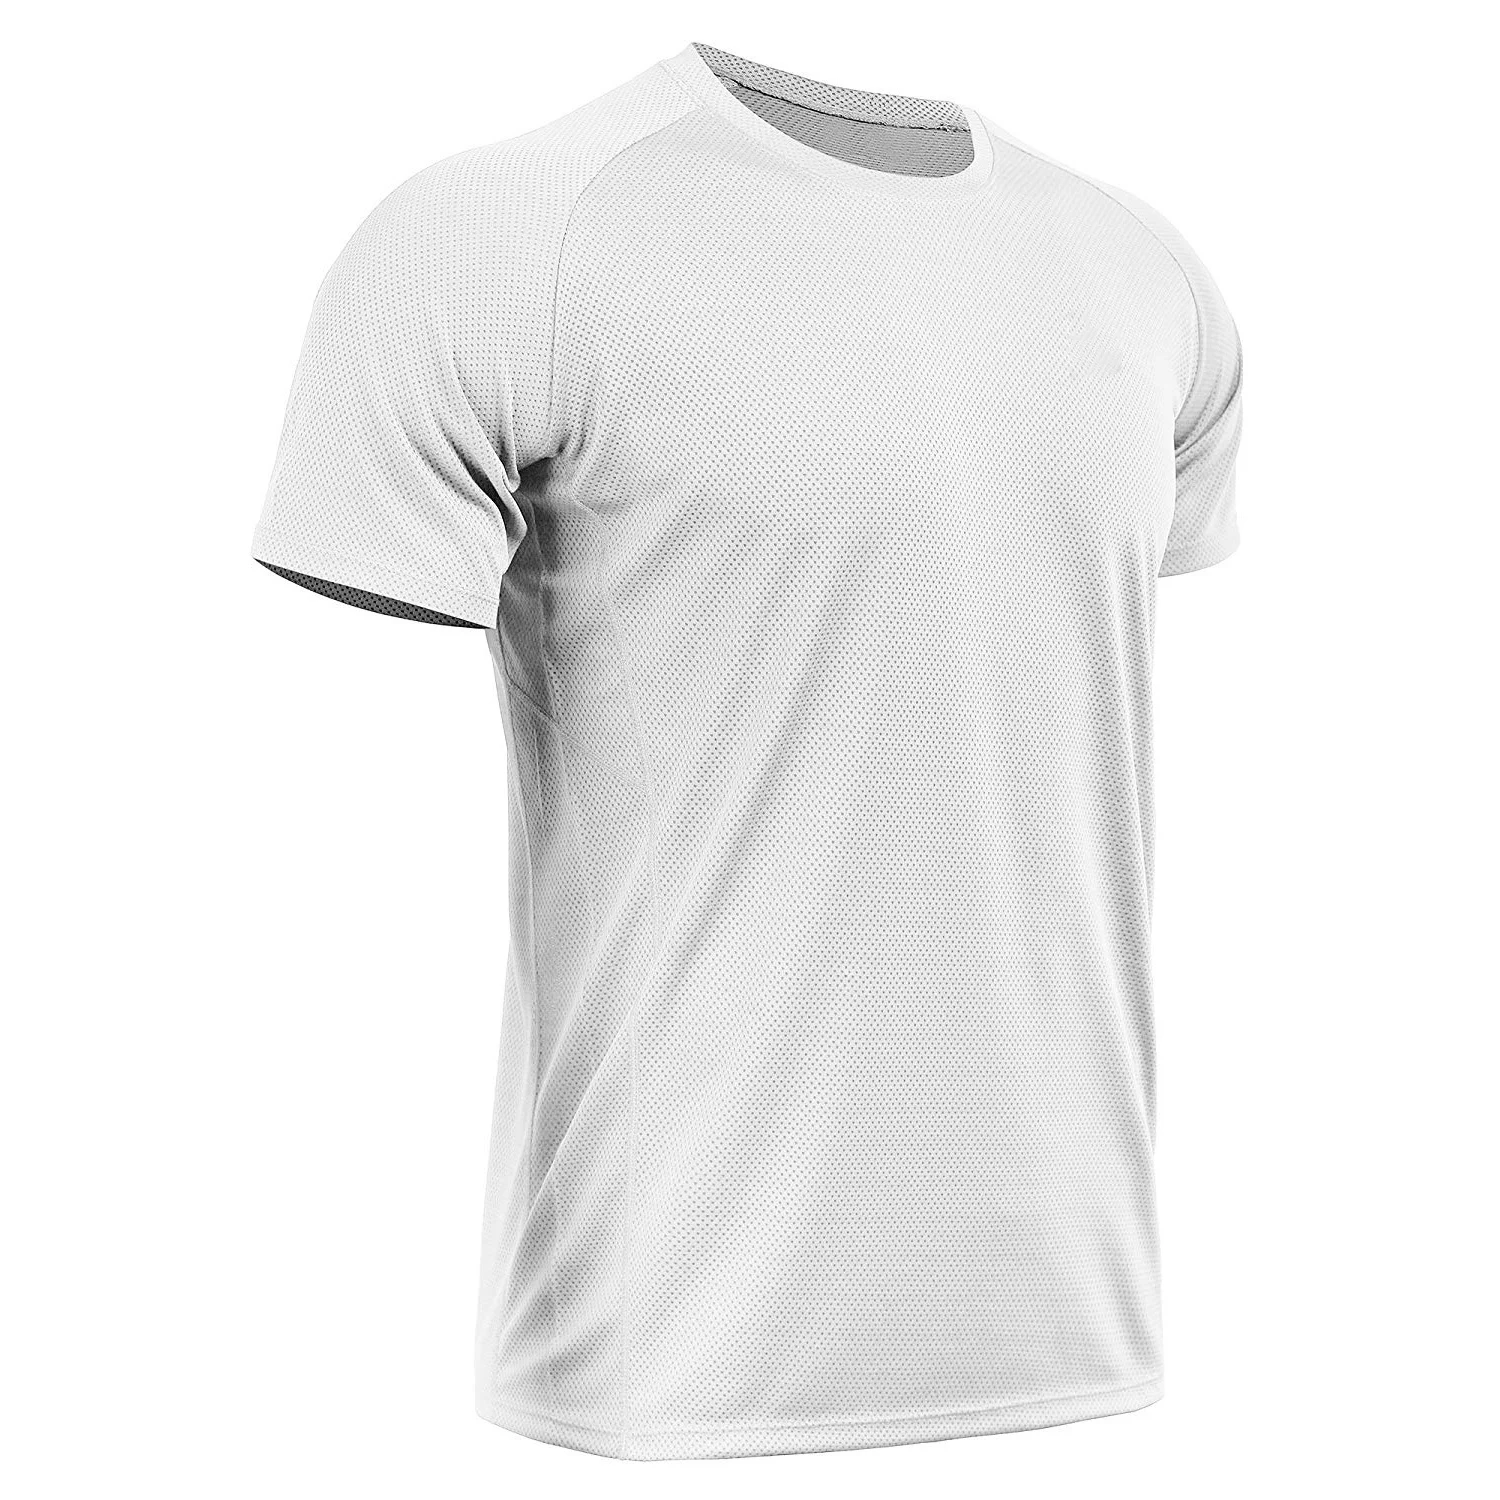 polyester athletic shirts